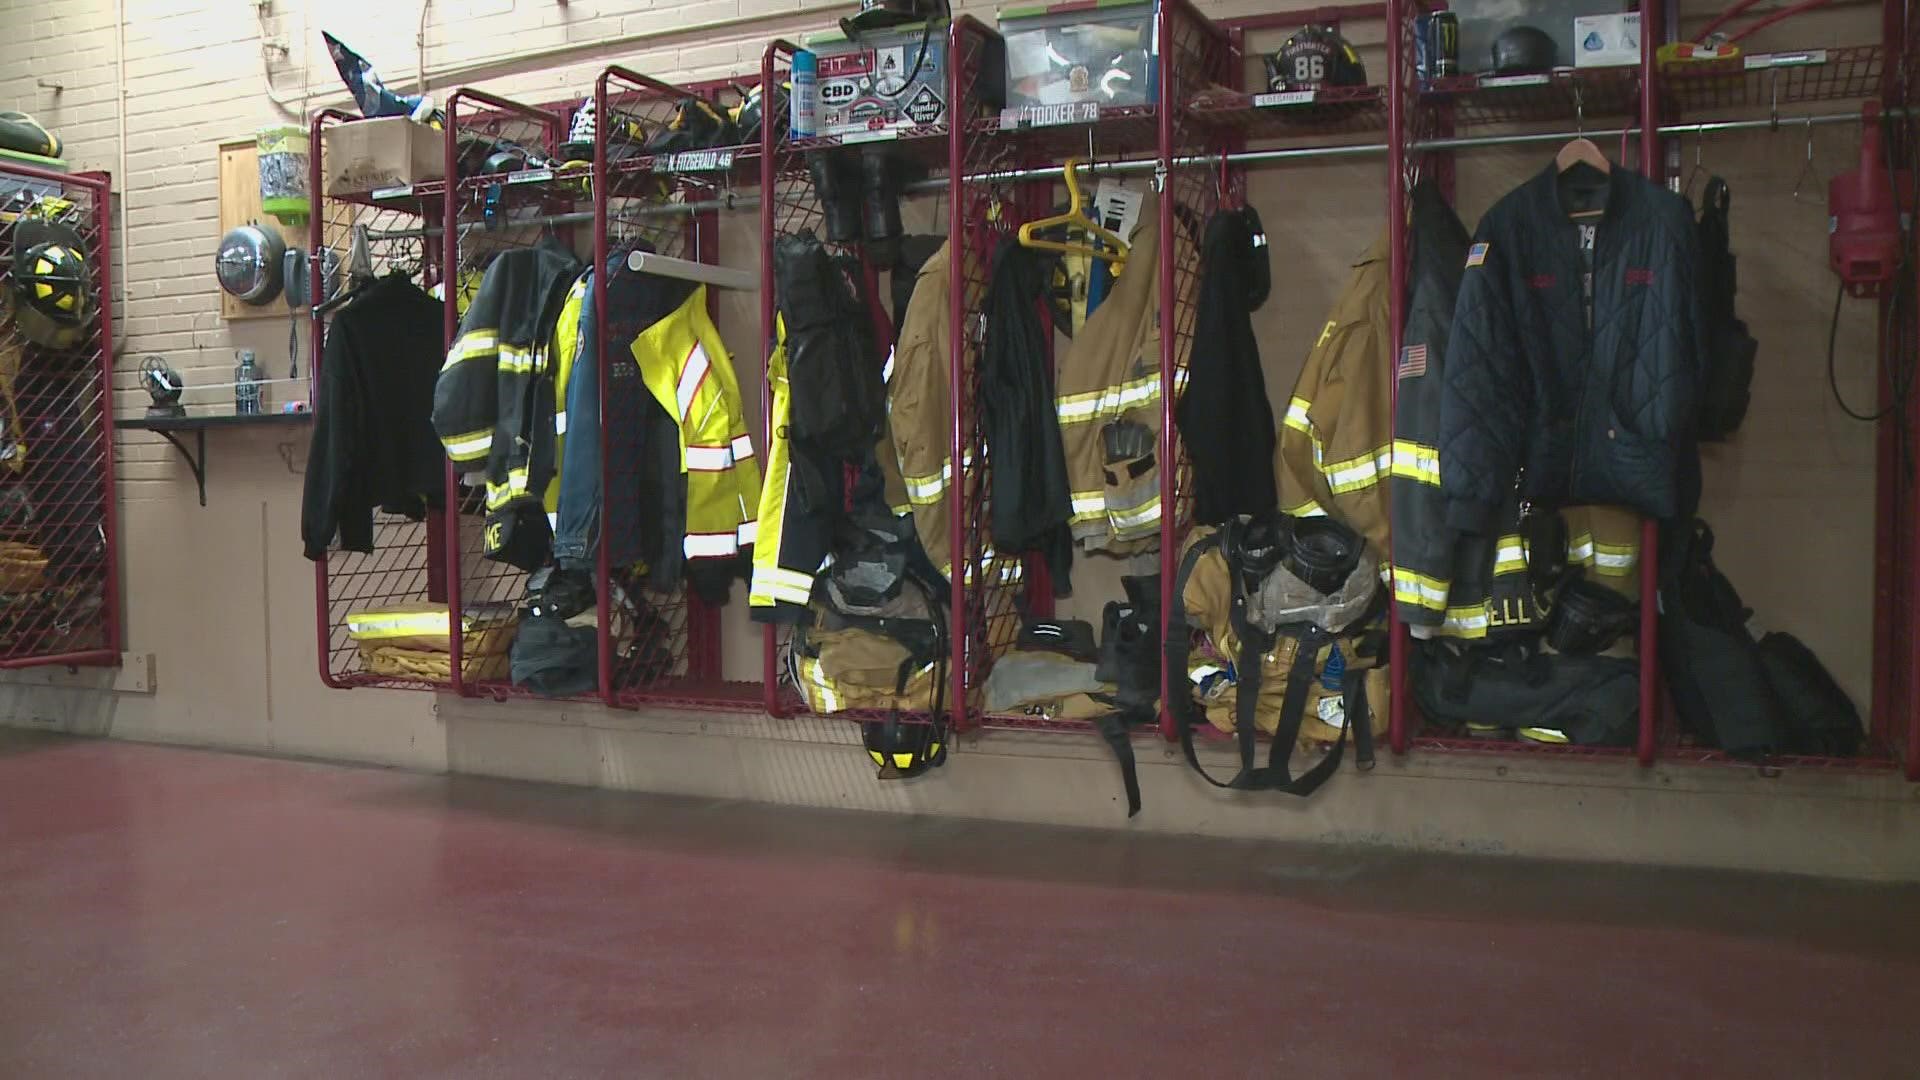 Concerns are mounting that the very equipment that keeps firefighters safe could be causing harm.